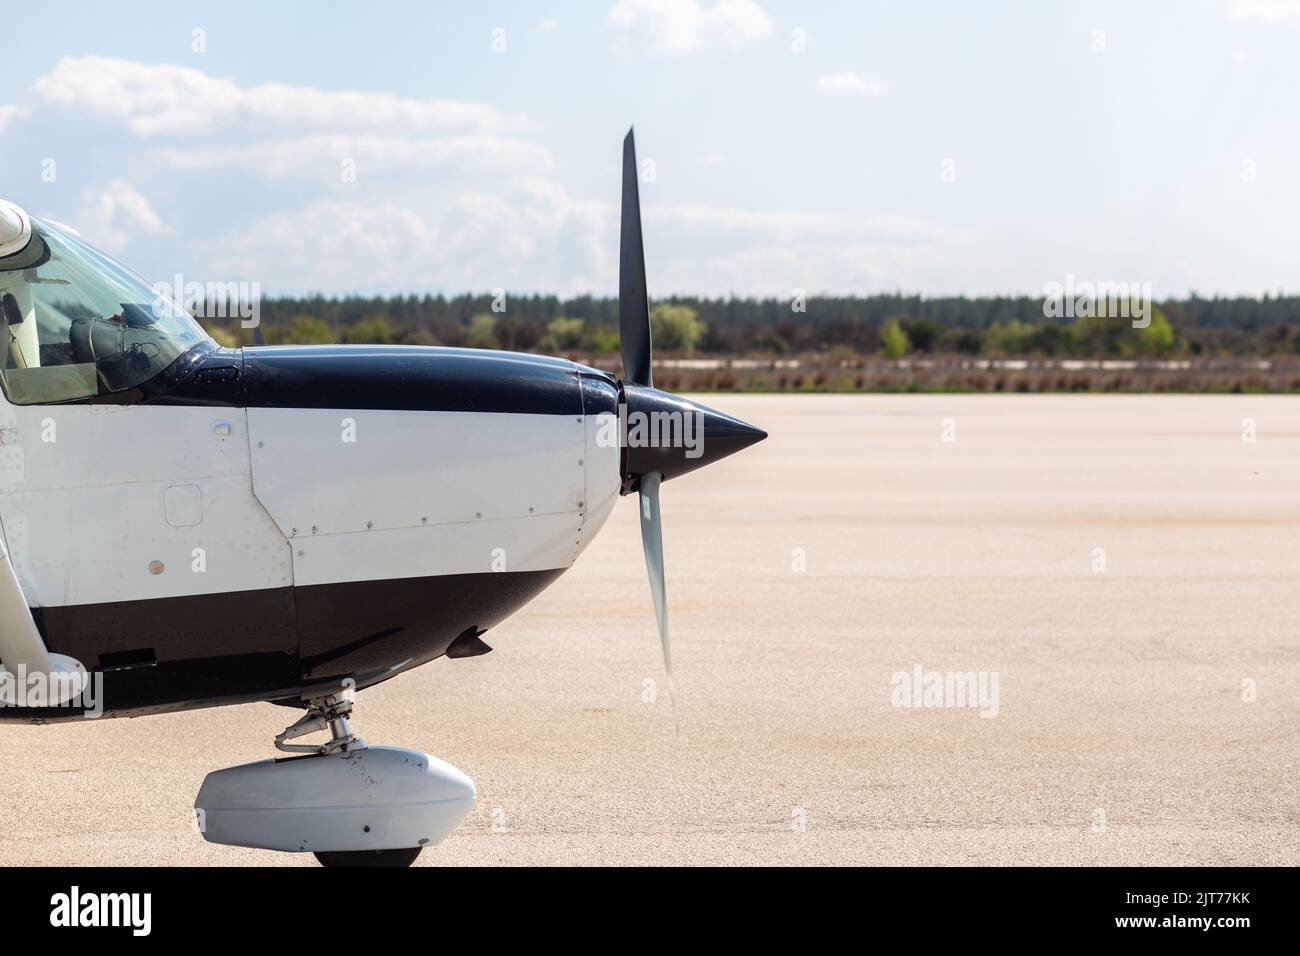 Side view of a small passenger plane. Stock Photo